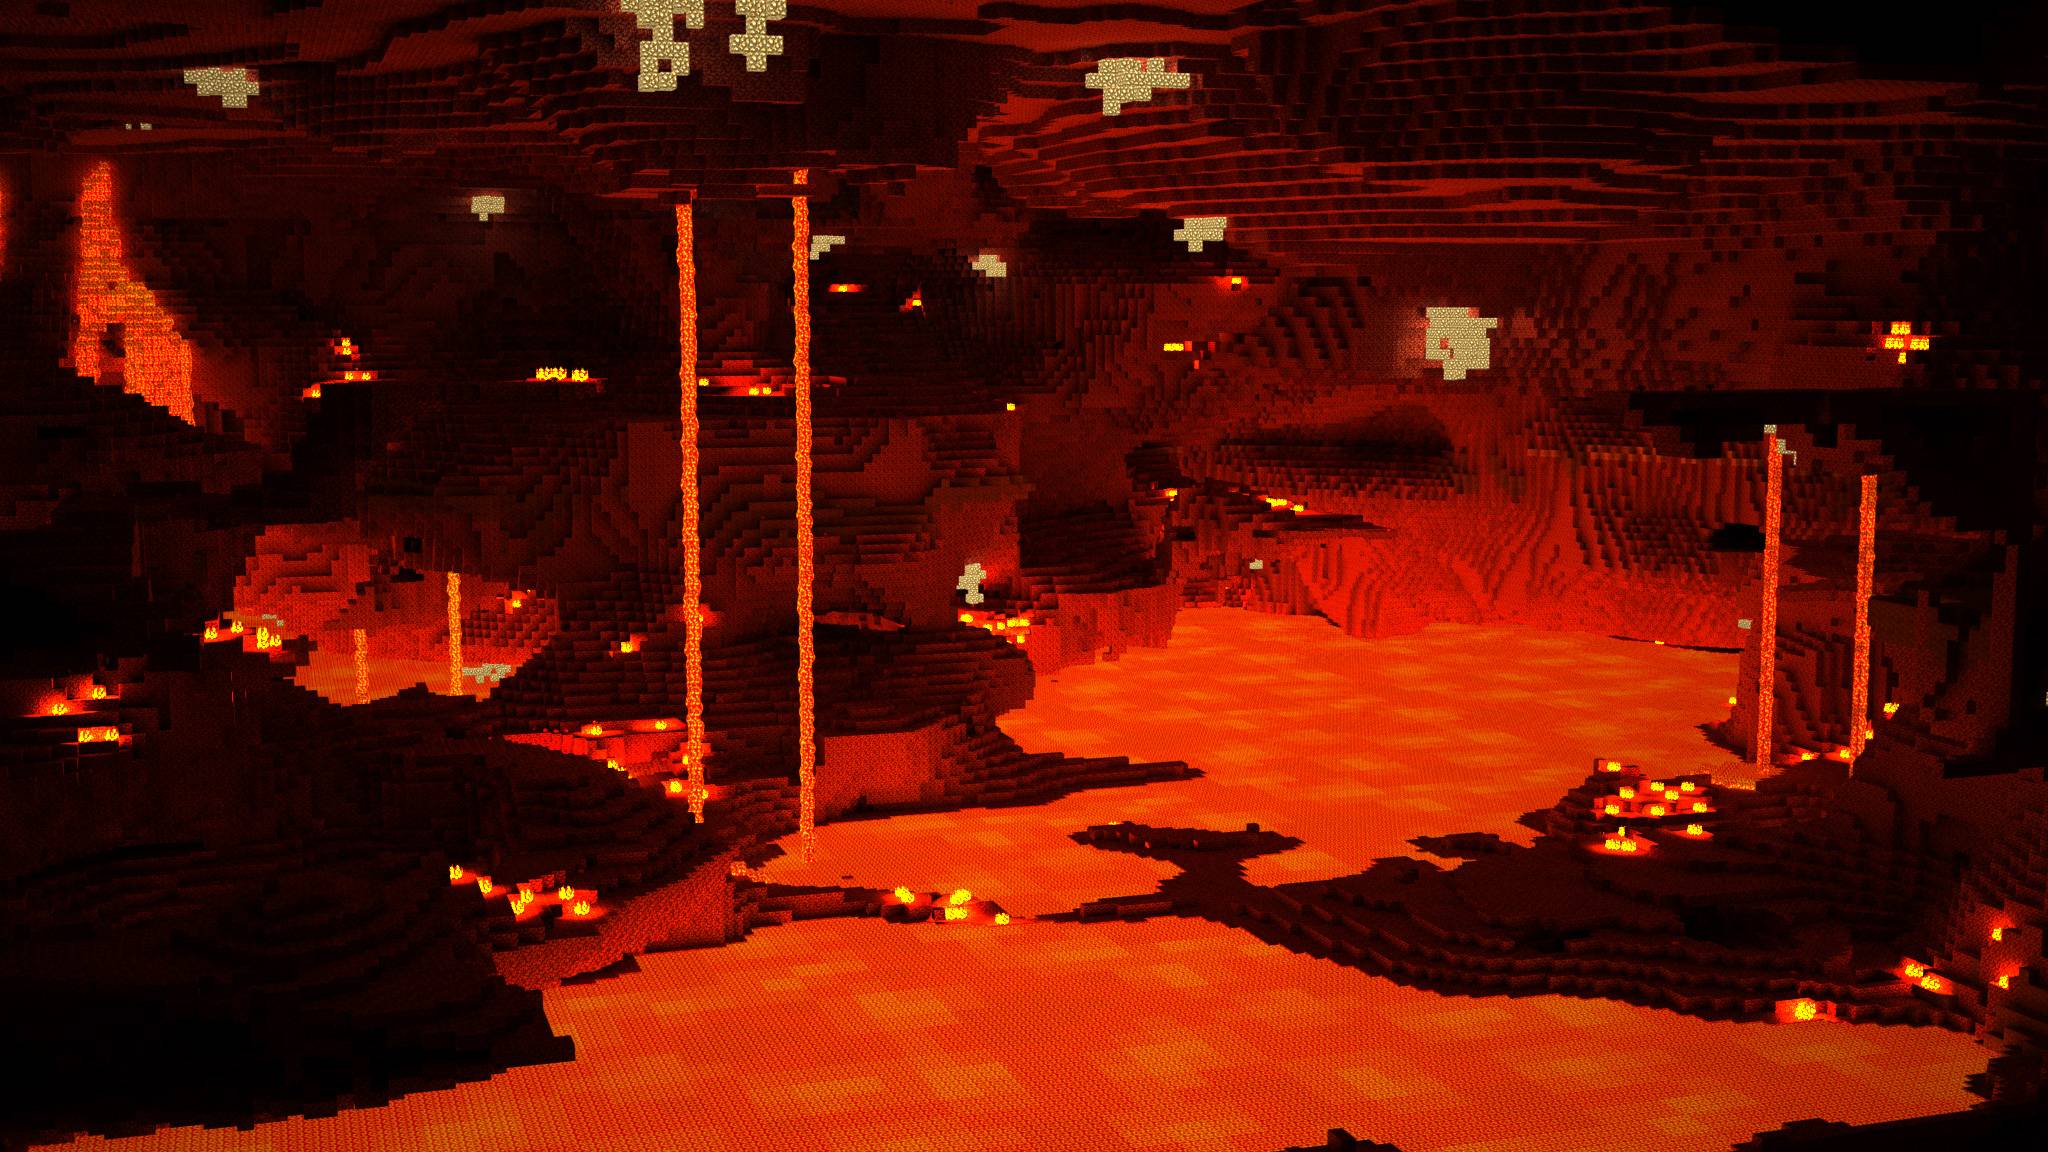 Red Minecraft Wallpapers - Wallpaper Cave